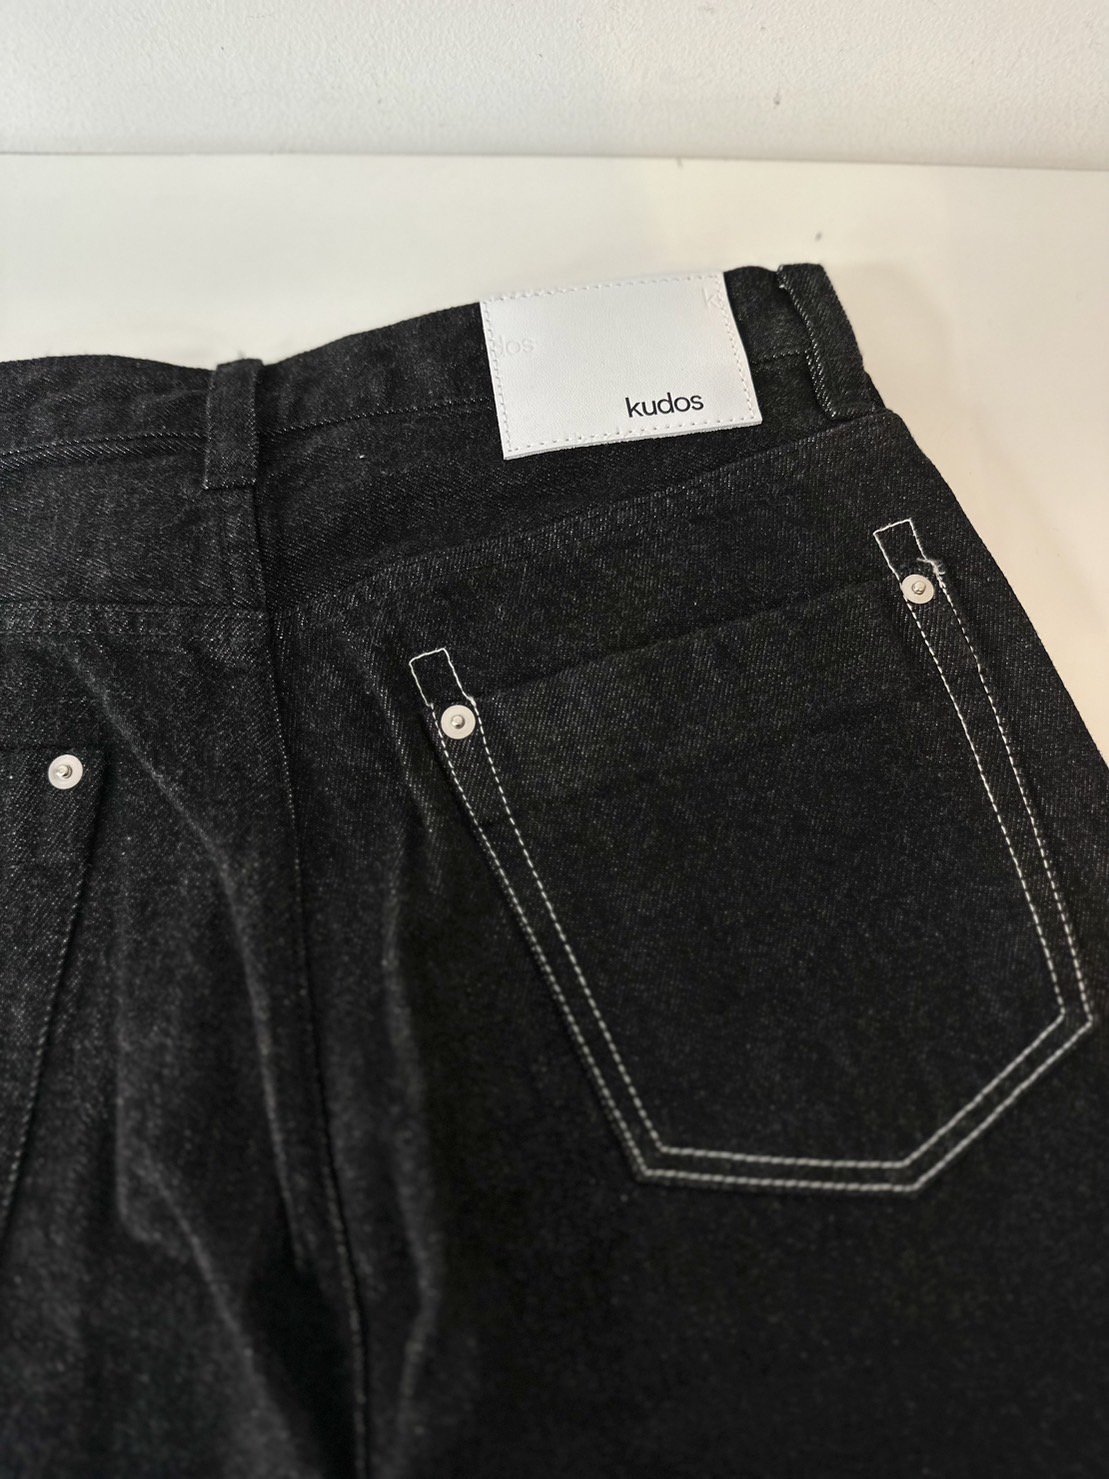 kudos<br />STRAIGHT DENIM TROUSERS / BLACK<img class='new_mark_img2' src='https://img.shop-pro.jp/img/new/icons14.gif' style='border:none;display:inline;margin:0px;padding:0px;width:auto;' />